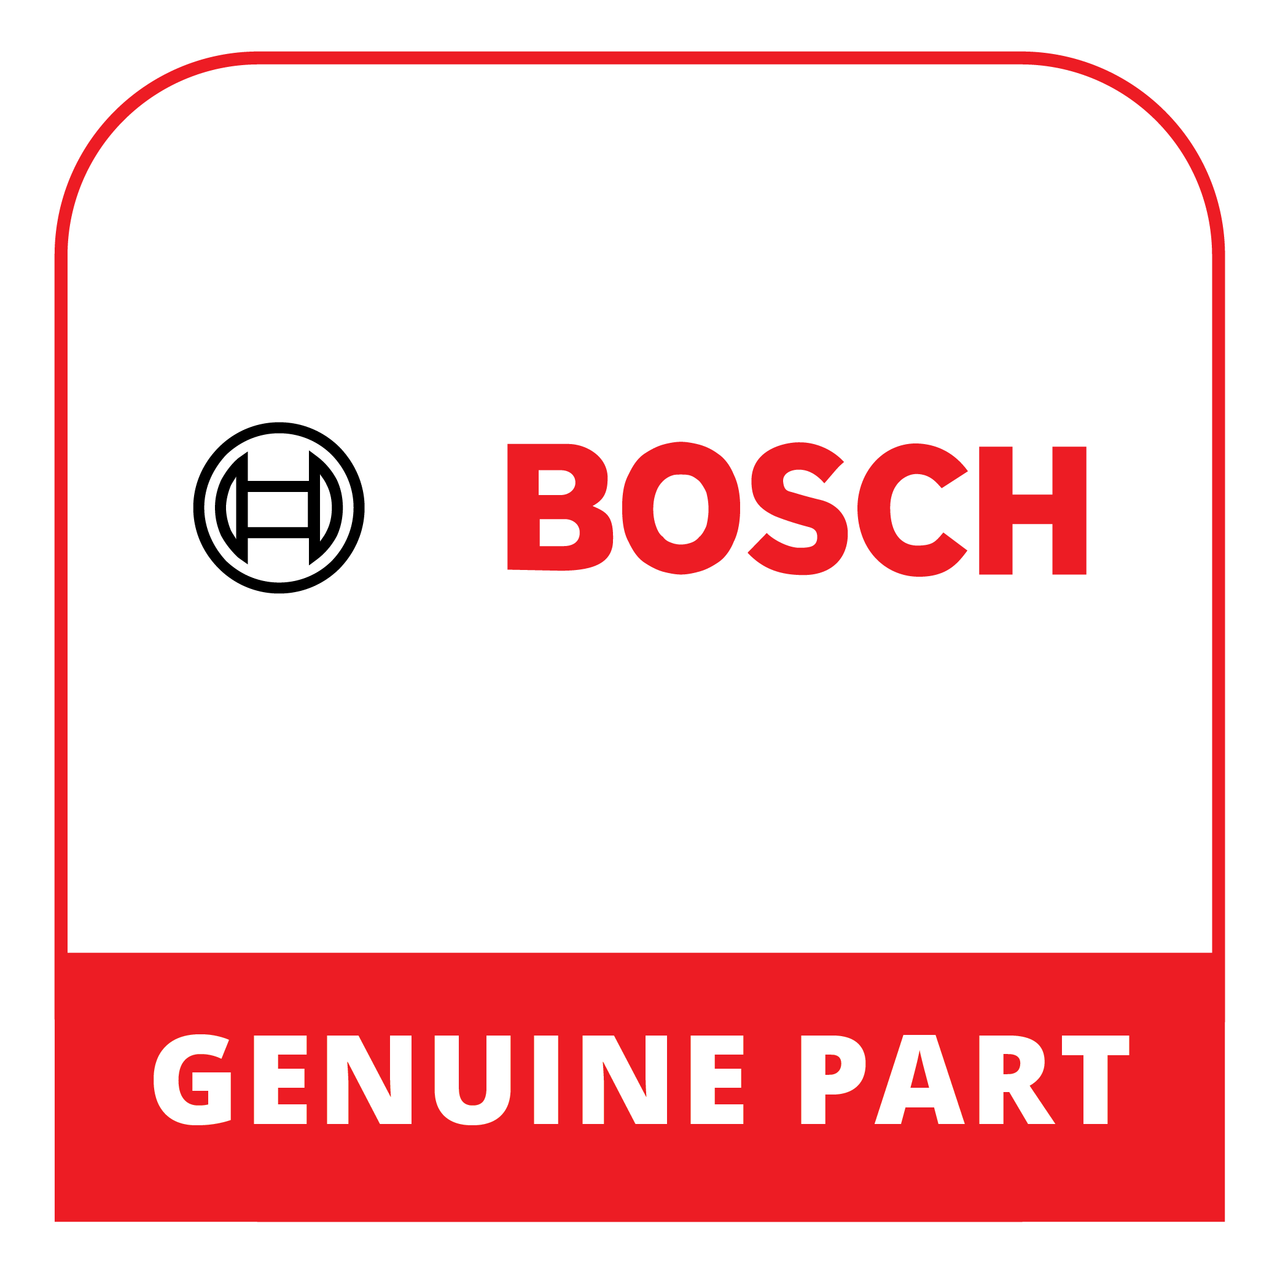 Bosch (Thermador) 00770080 - Panel - Genuine Bosch (Thermador) Part